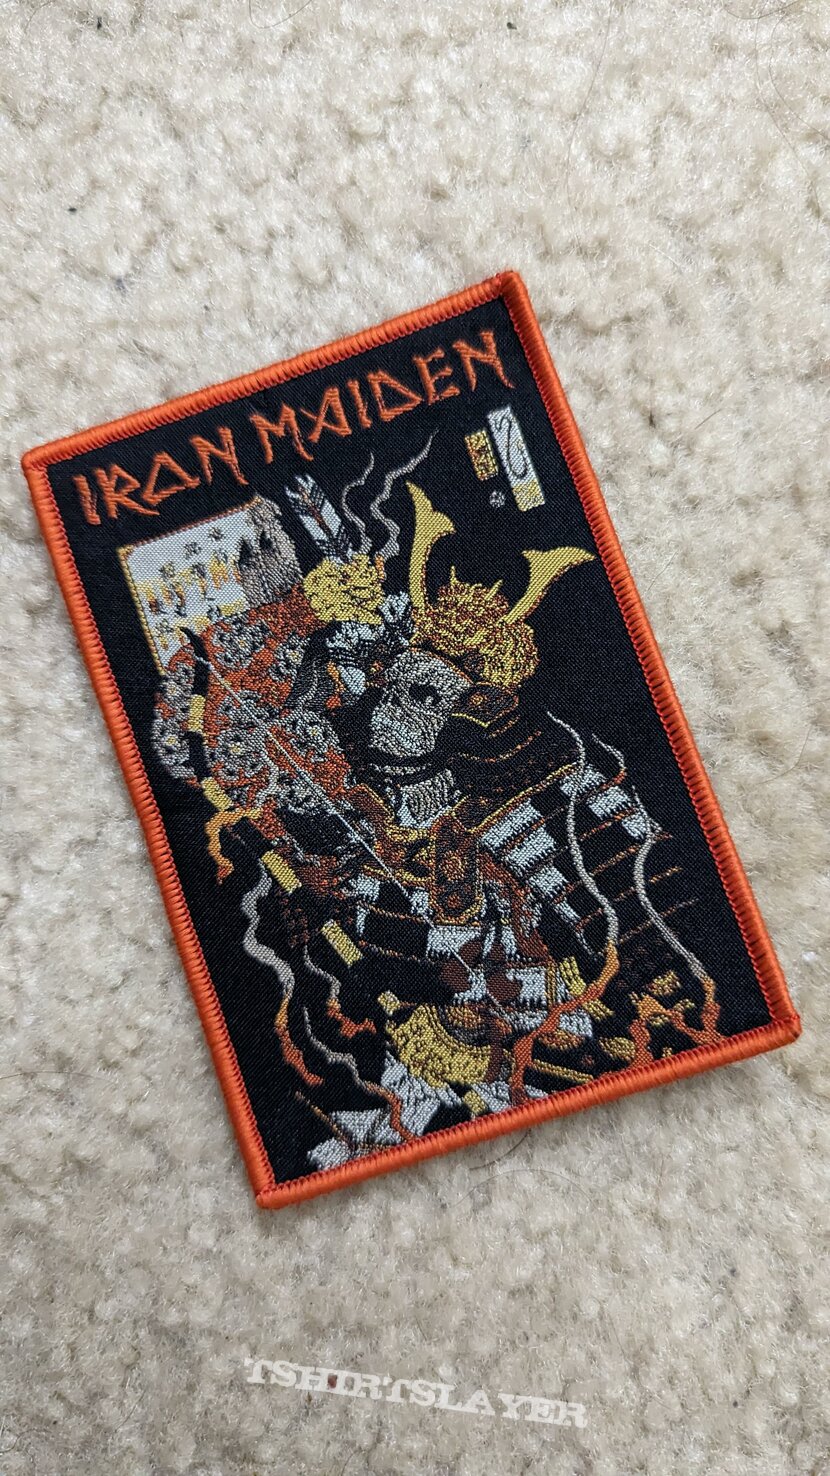 Iron Maiden  - japanese style patch